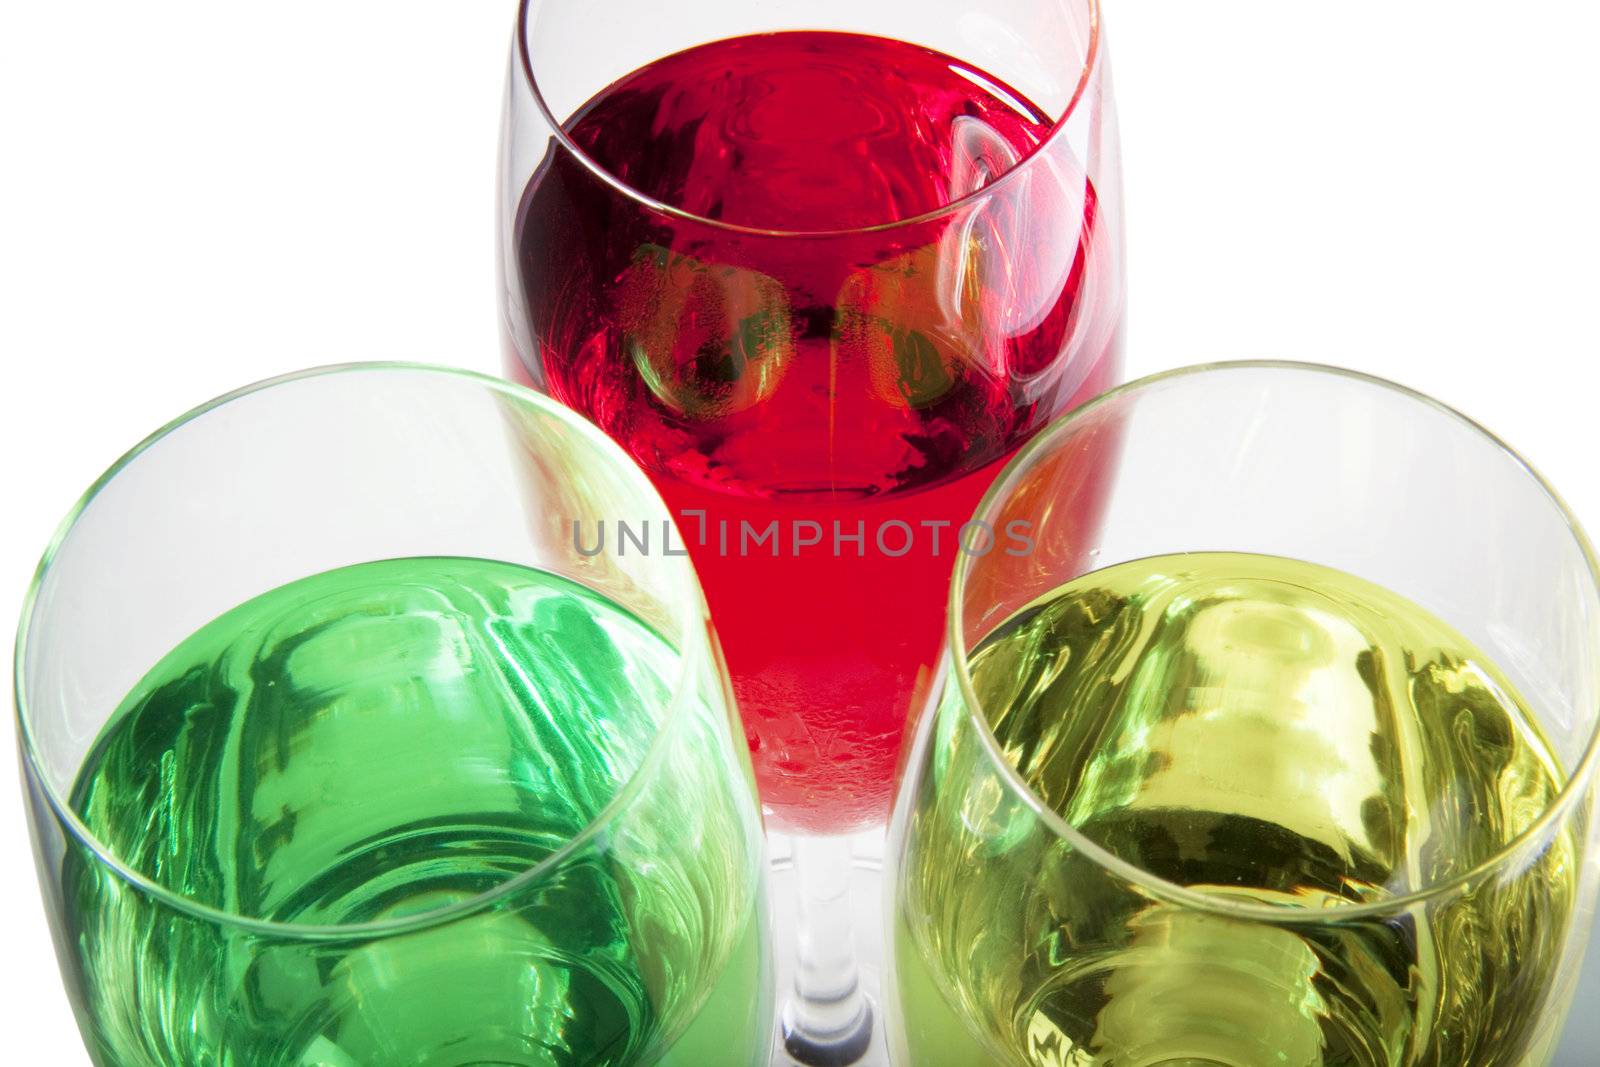 Three solorful cocktails for a party or celebration served in a champagne glass